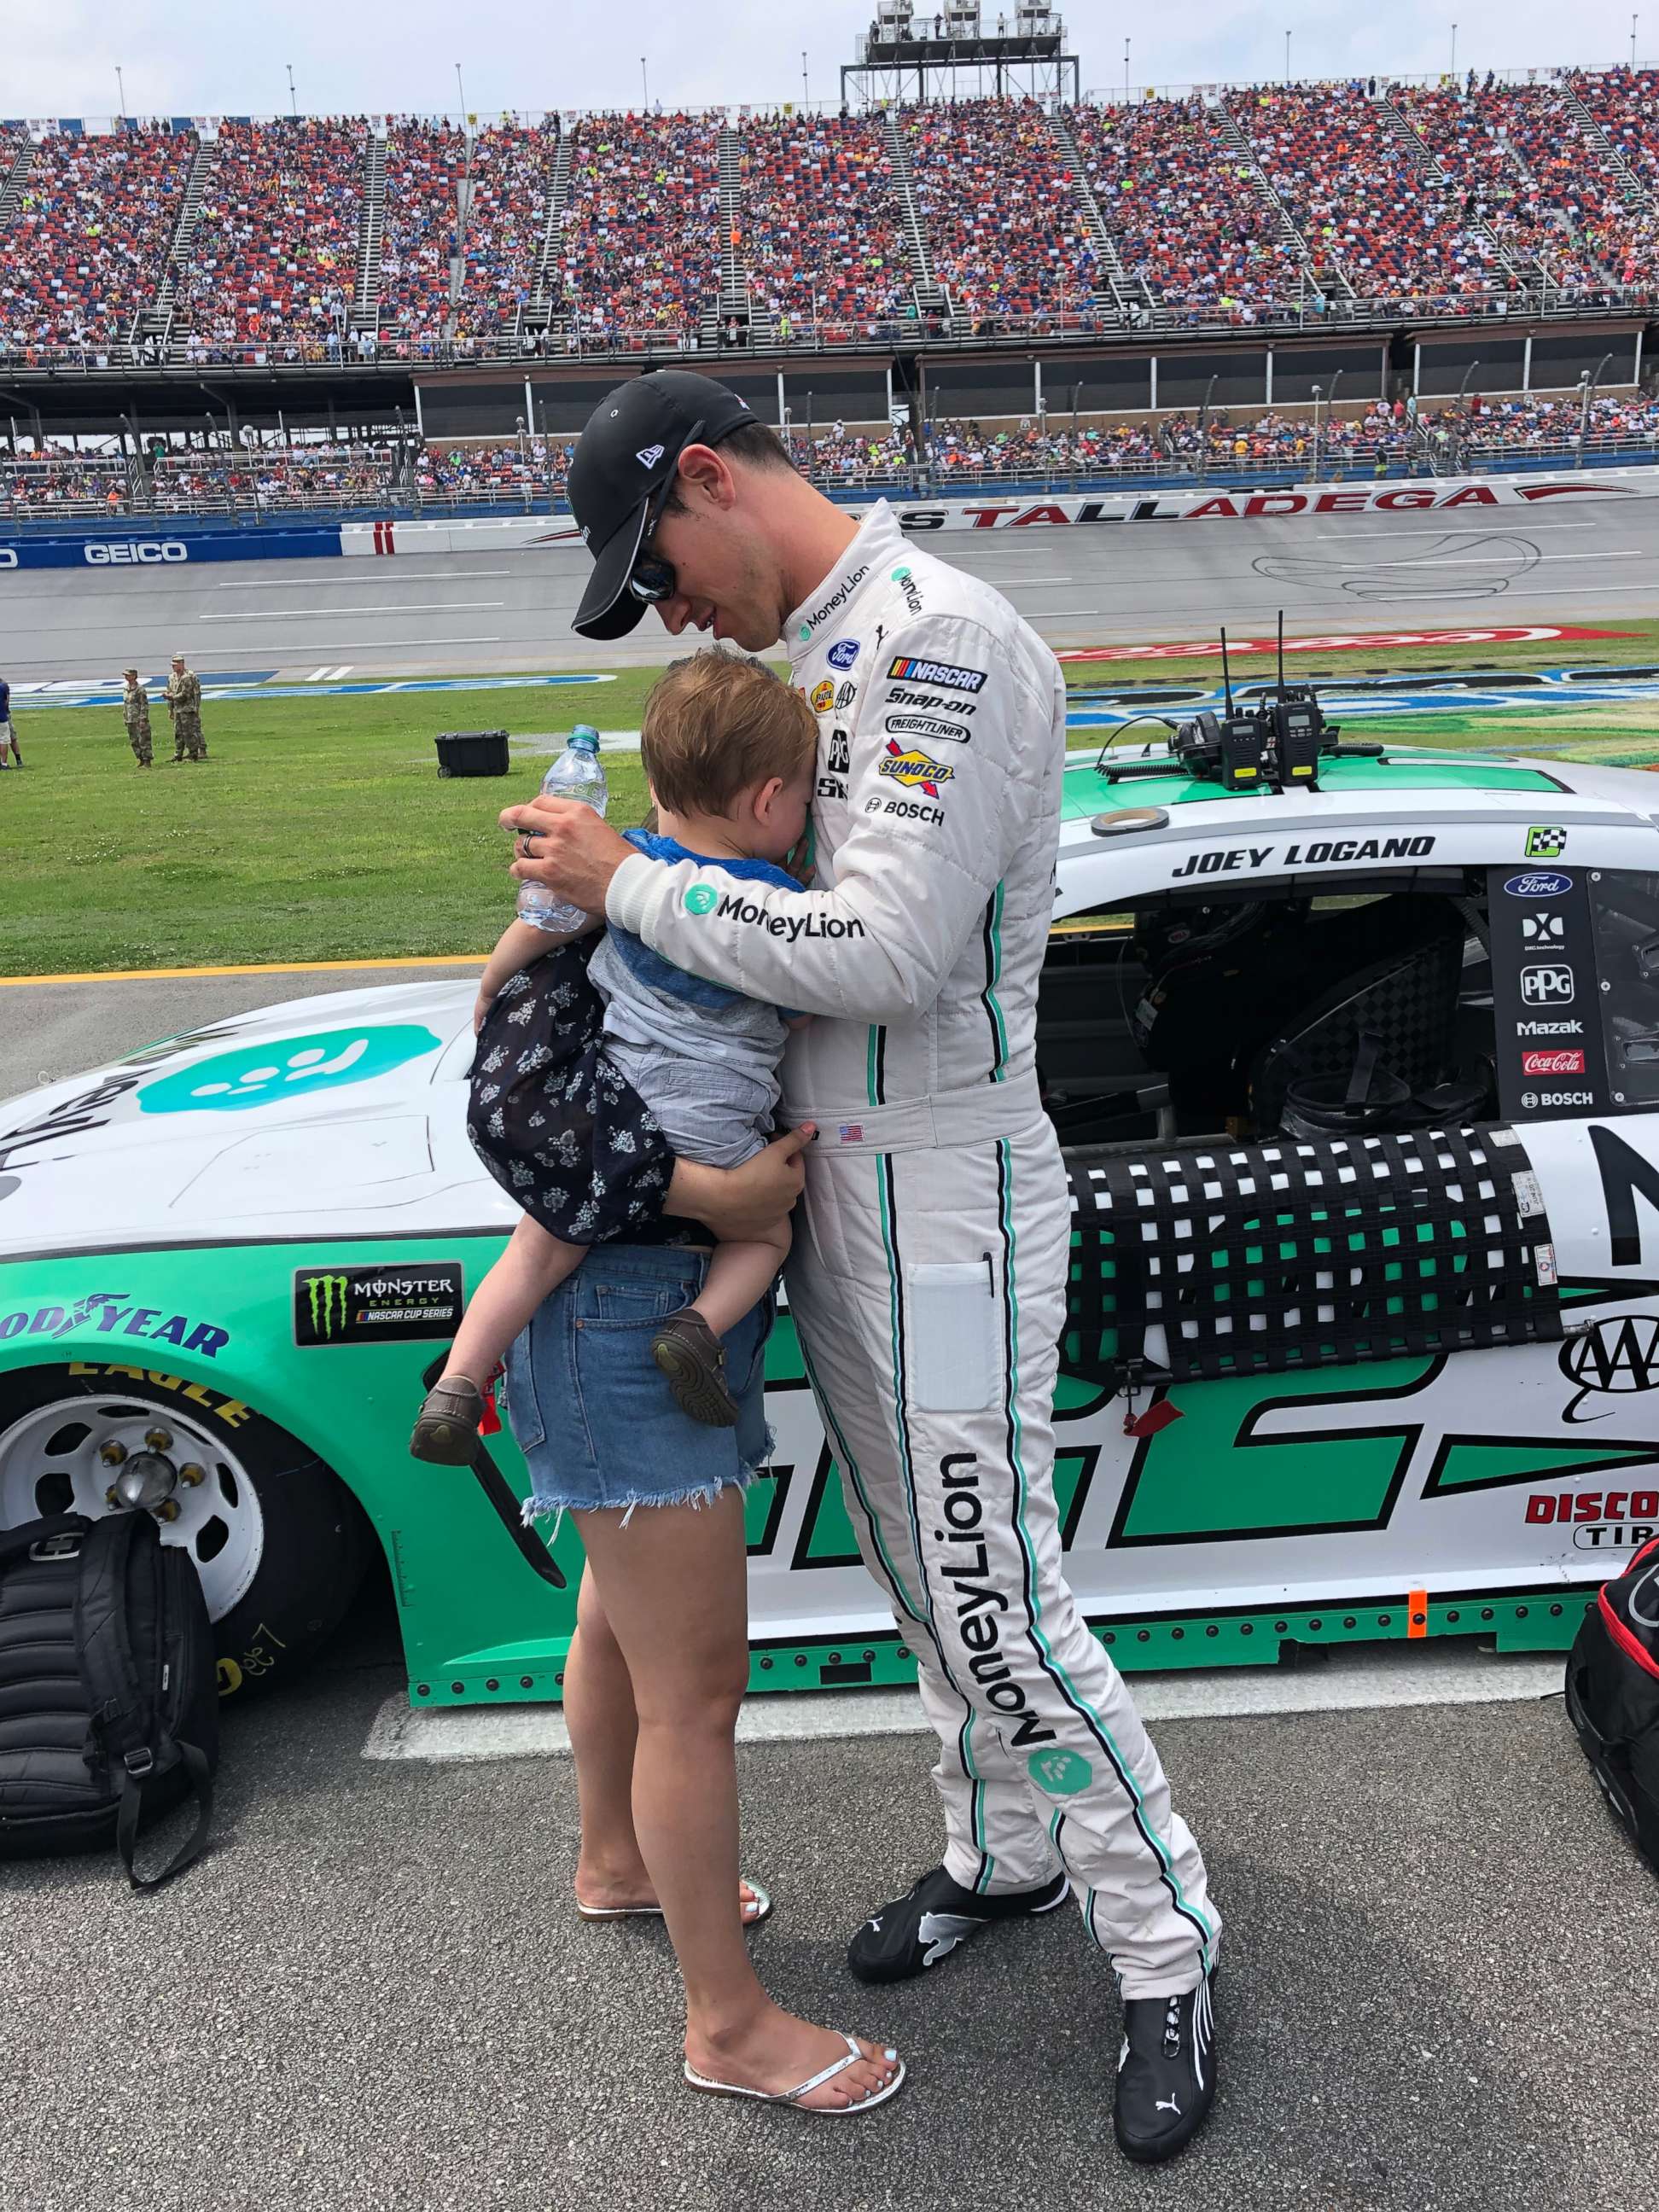 PHOTO: Joey Logano and his family share a sweet moment before a NASCAR race at Talladega Superspeedway, April 28, 2019. 